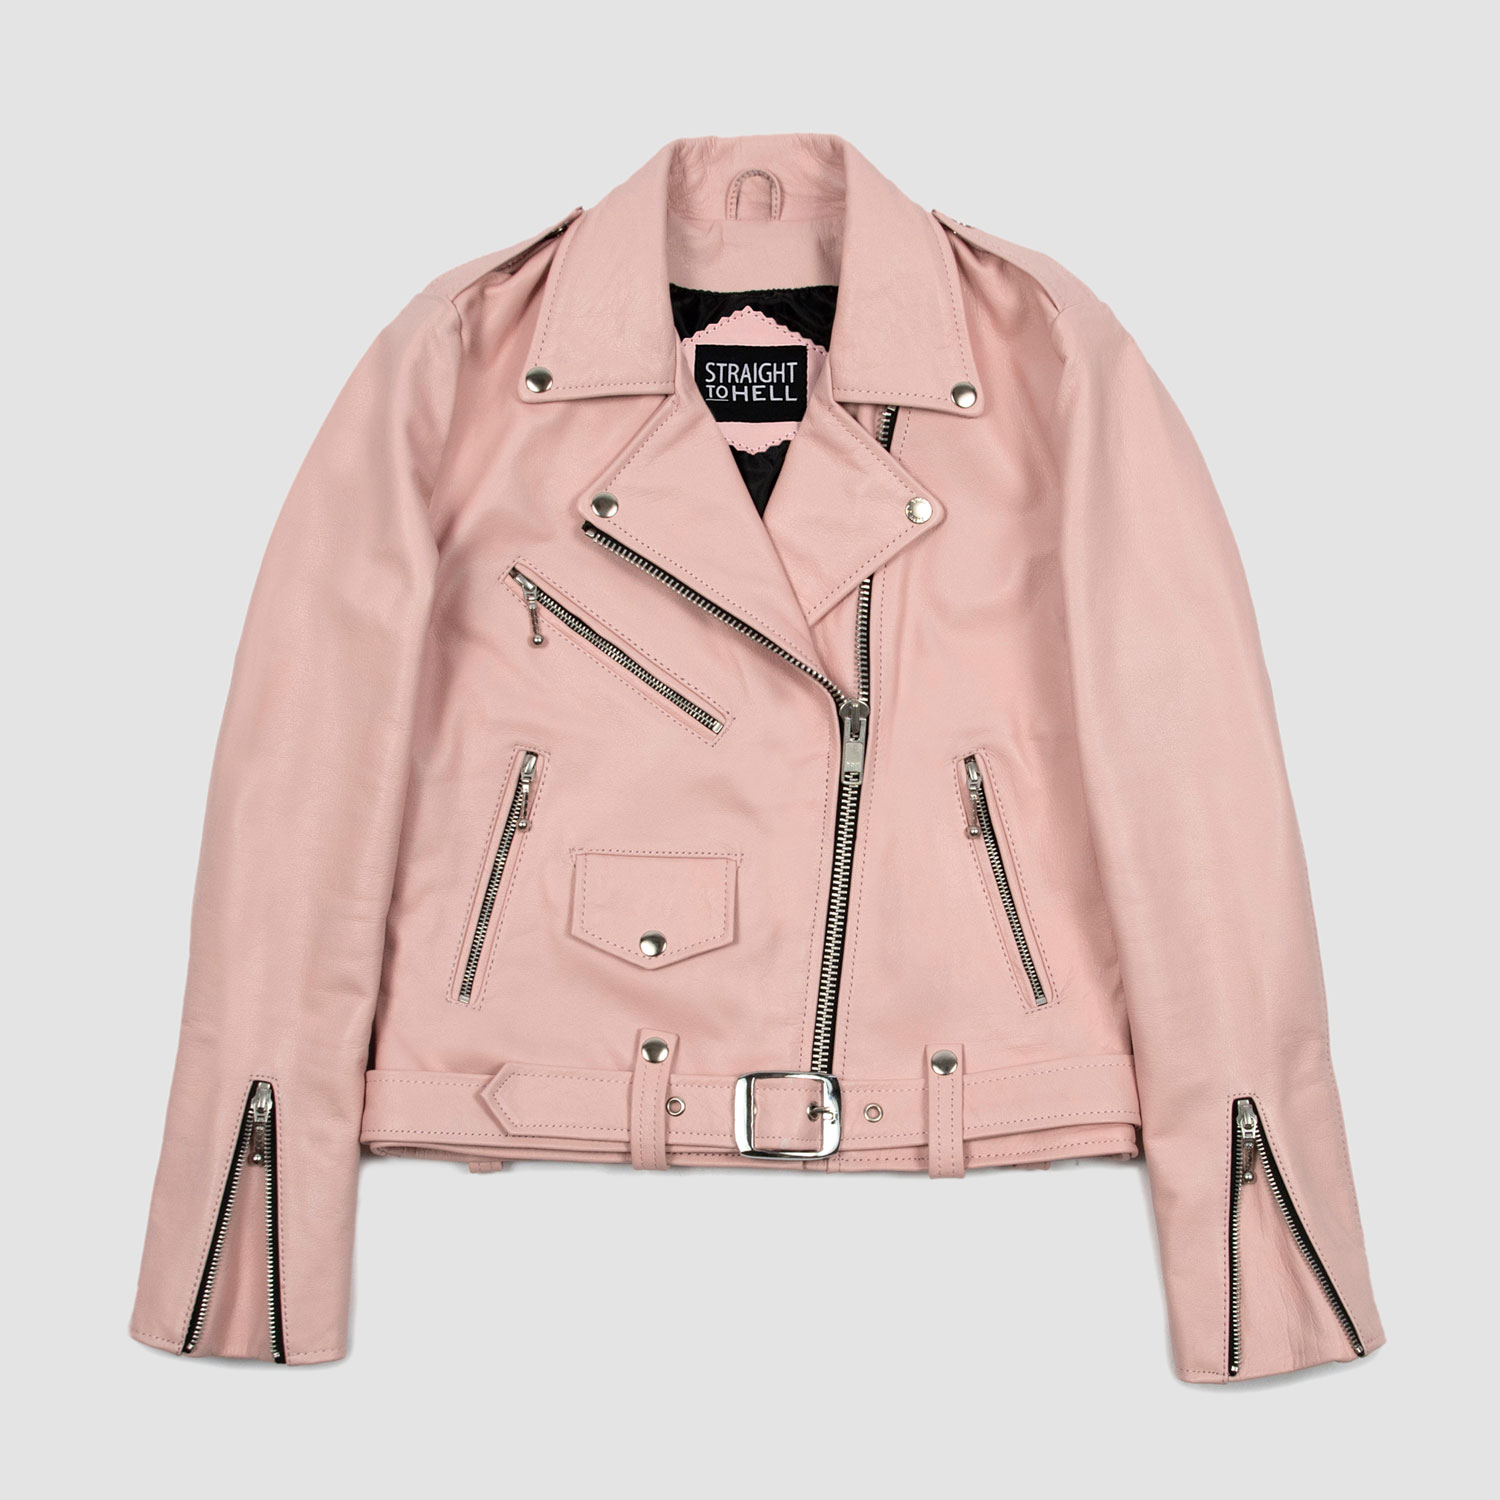 Commando - 4XL) To Jacket Hell M, Straight Pink XL, (Size Leather L, Dusty 2XL, 3XL, XS, | S, Apparel